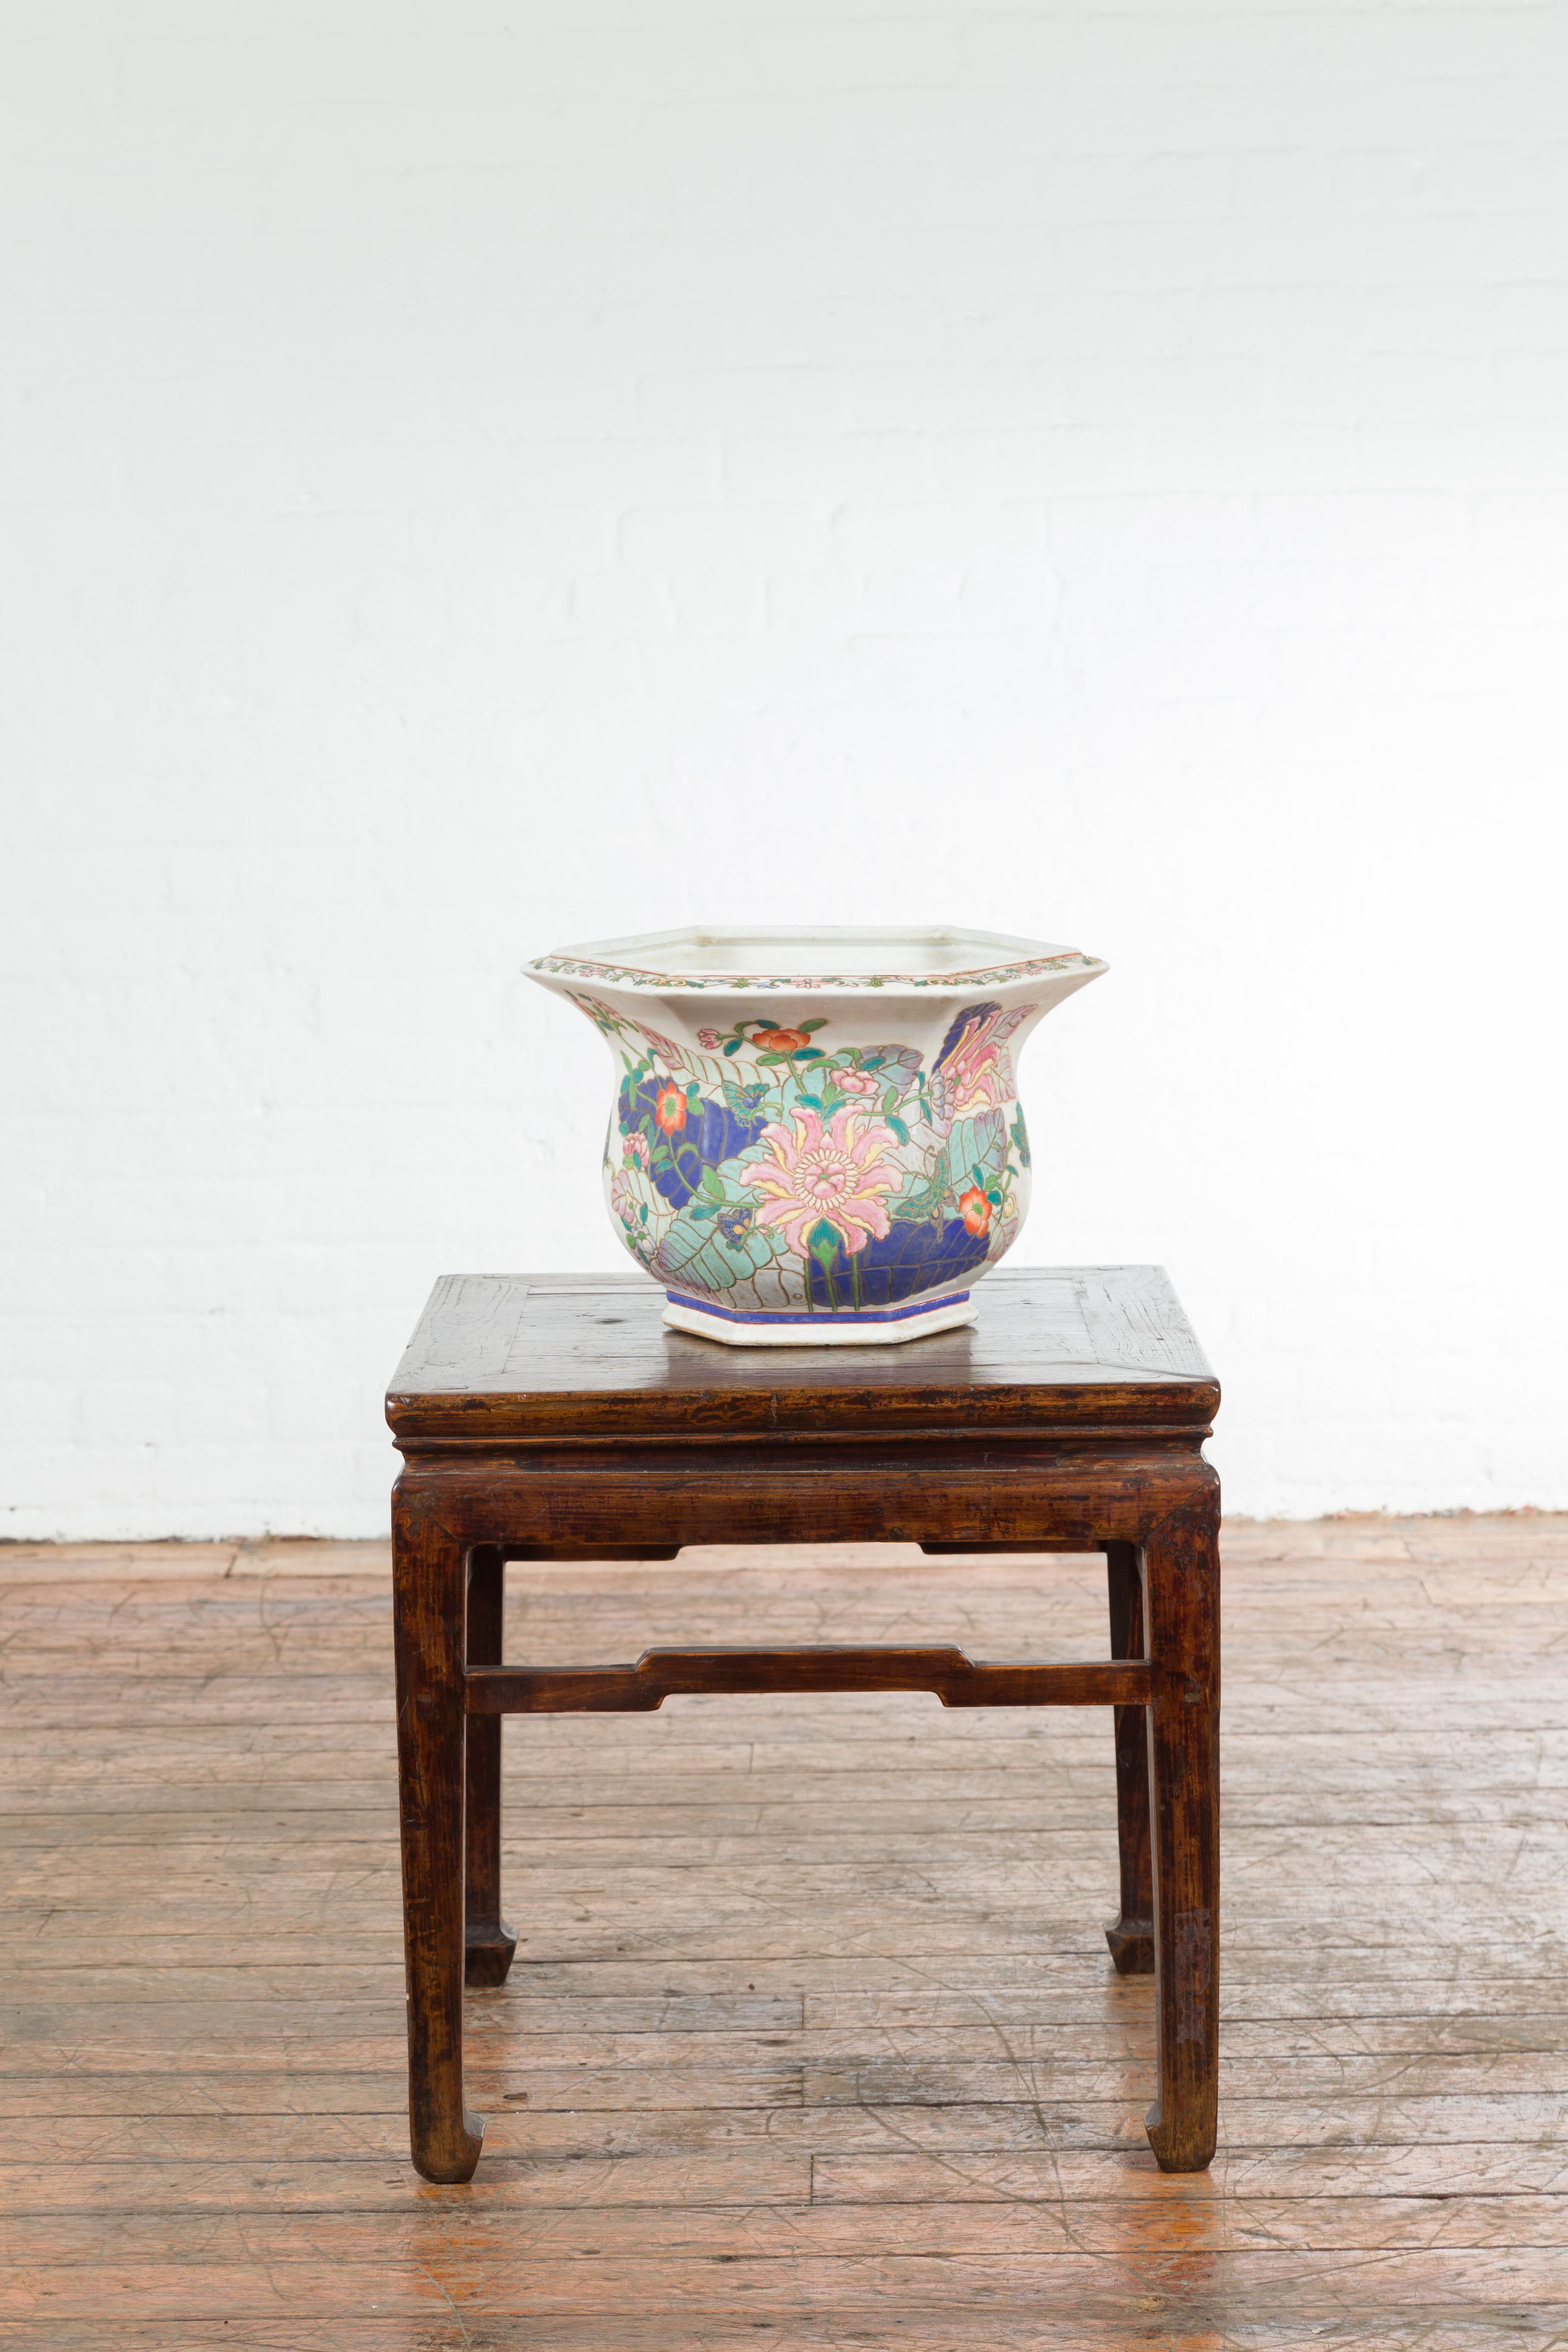 20th Century Chinese Vintage Hexagonal Planter with Pastel Foliage, Flowers and Butterflies For Sale